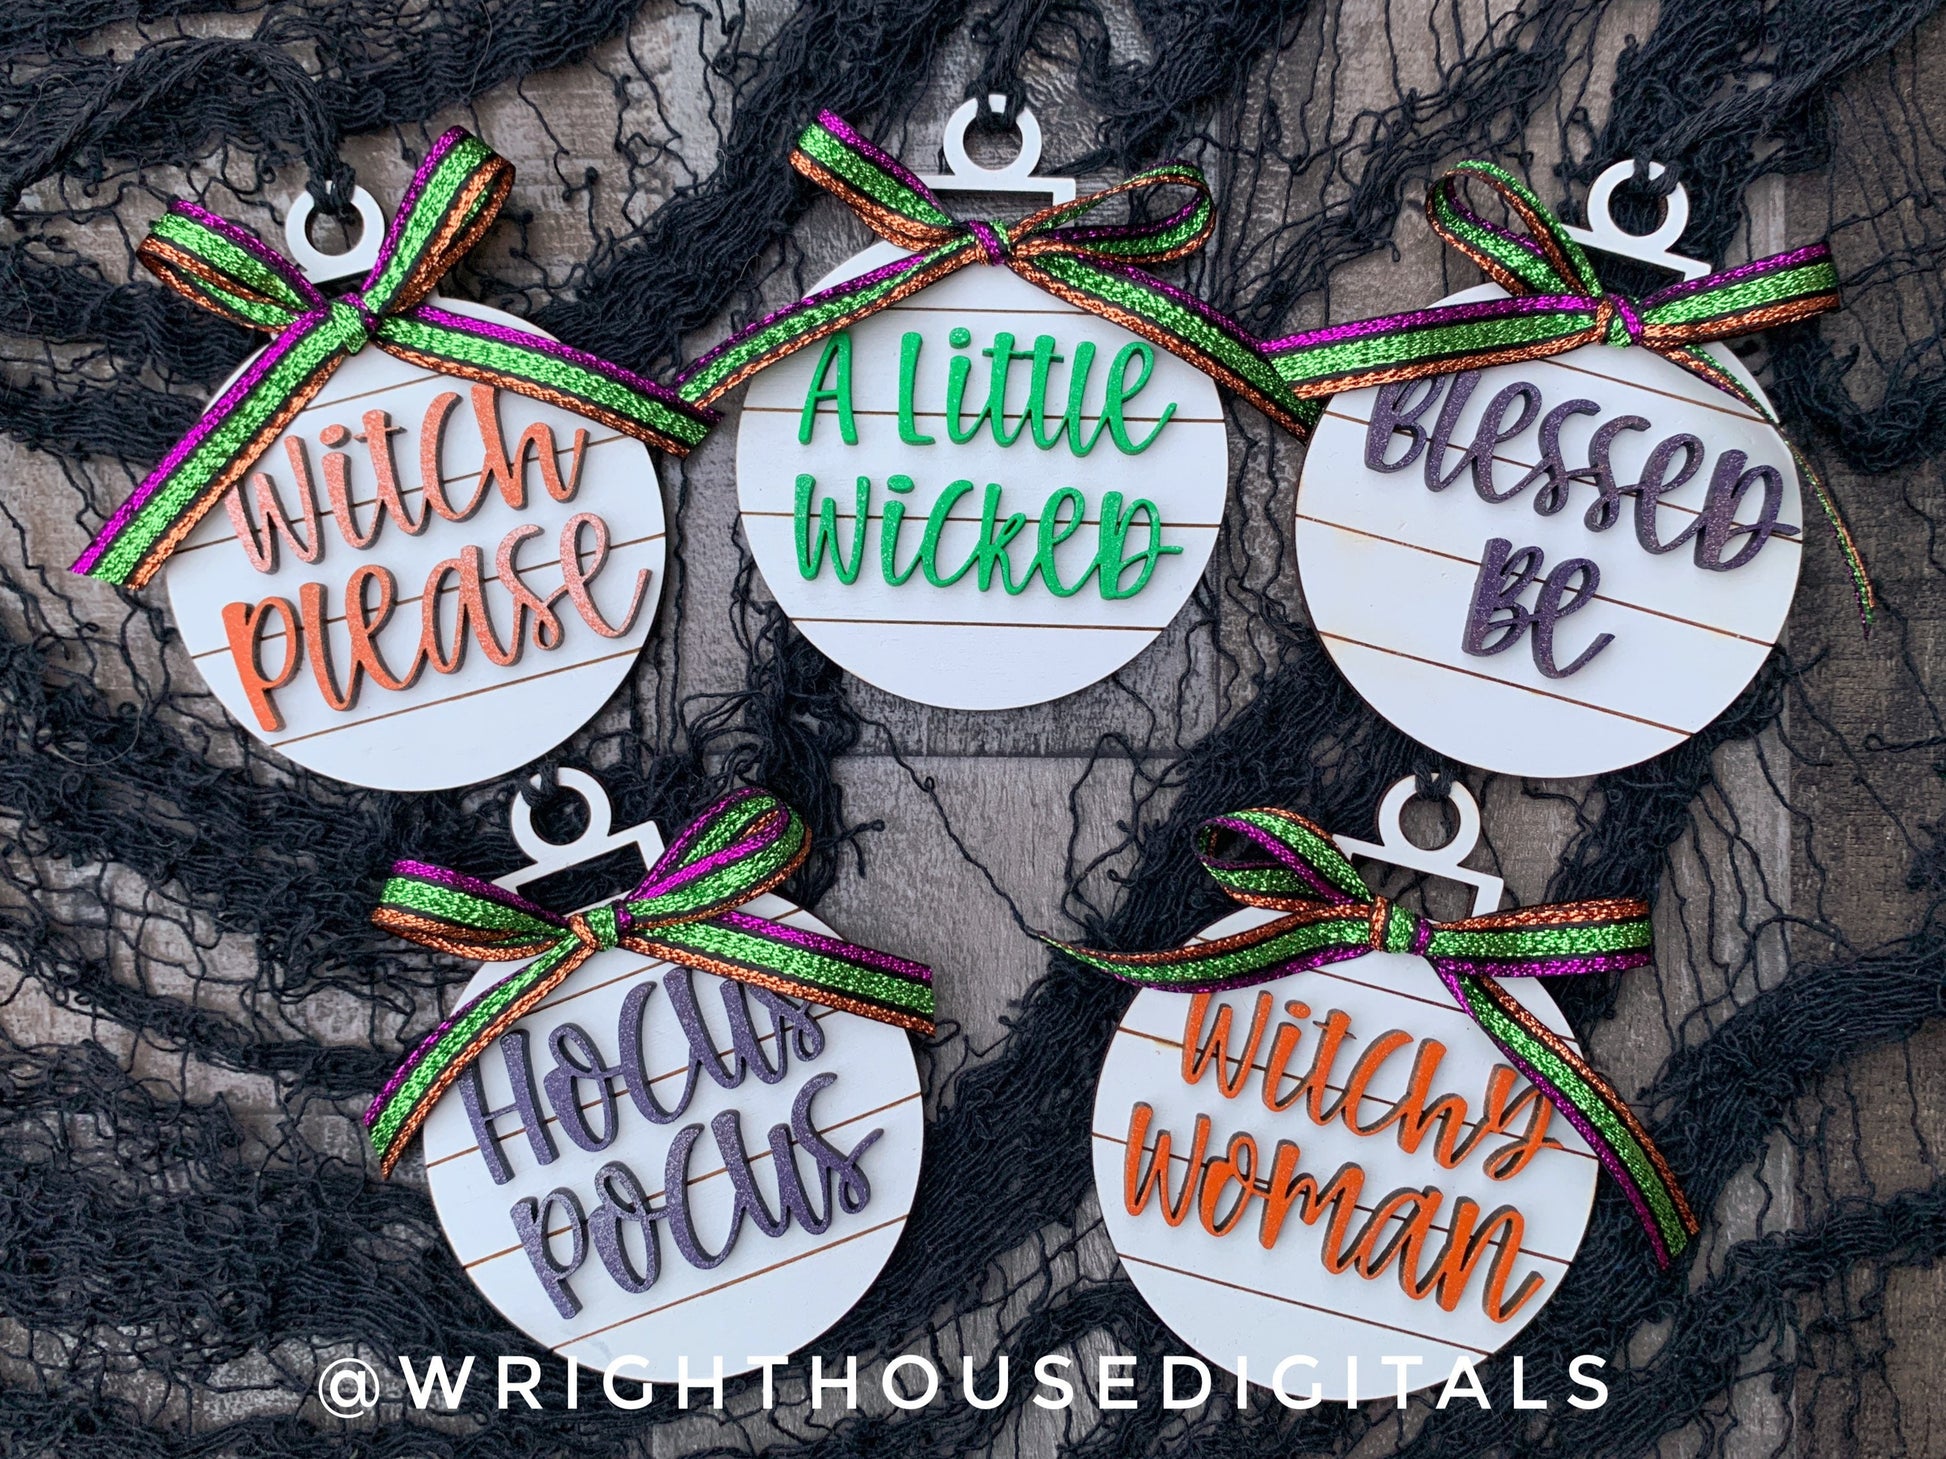 Witchy Halloween Tree Decor - Shiplap Wooden Tree Ornaments - Gothic Fireplace Mantel Accents - Seasonal Tiered Tray and Coffee Bar Decor